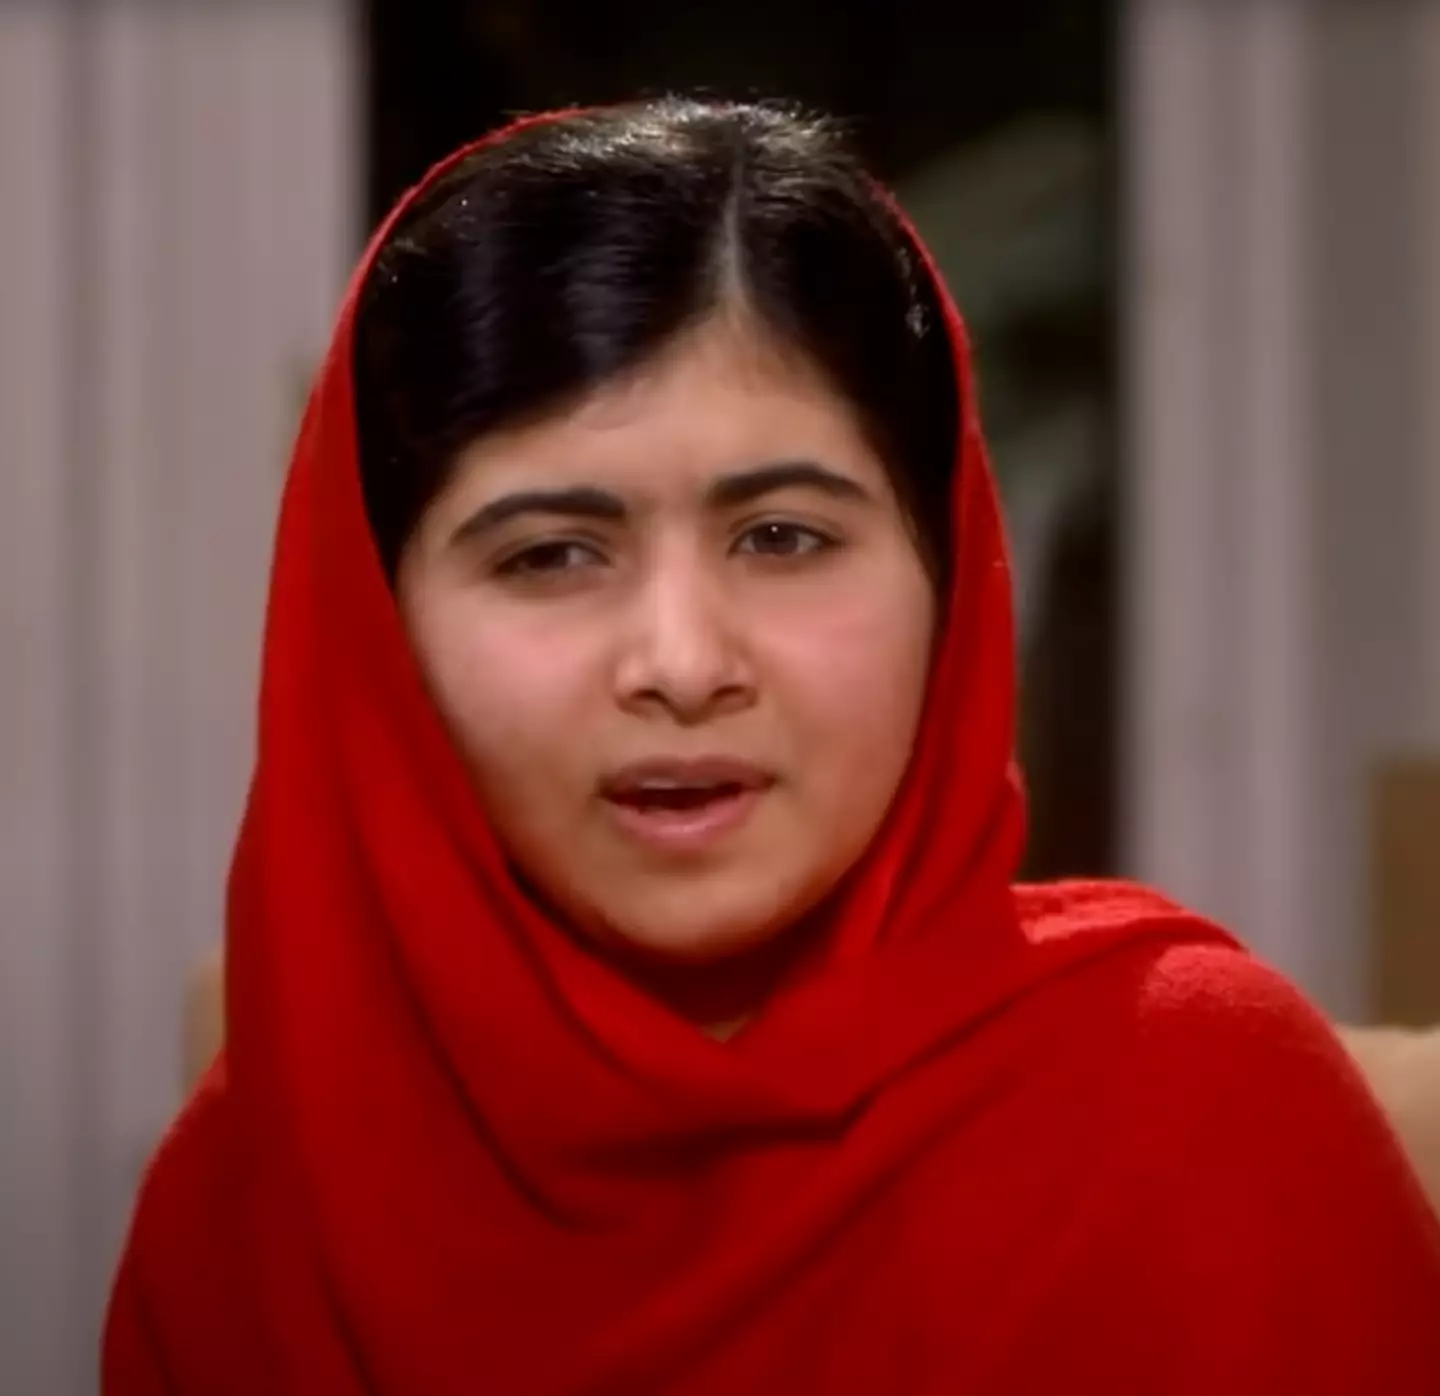 Malala Yousafzai was awarded the Nobel Peace Prize after she was shot in the head on a school bus by a Taliban gunman.